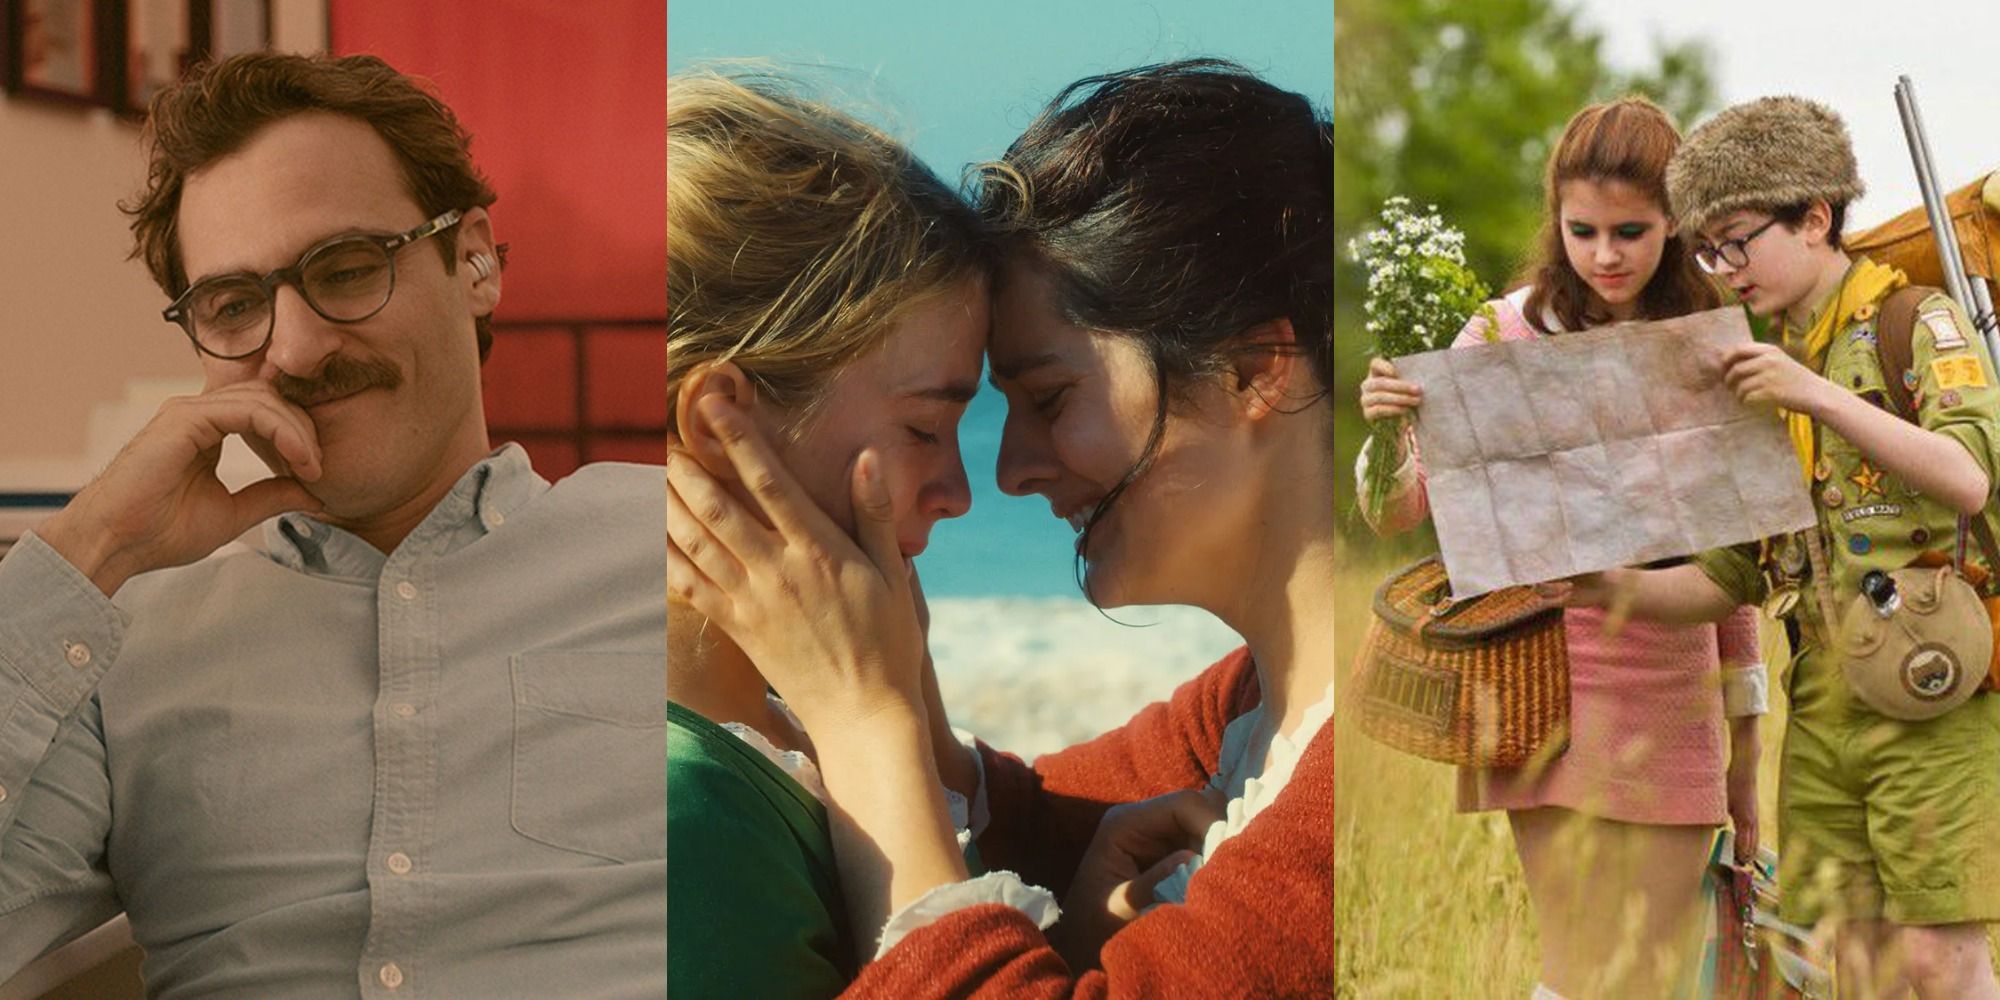 Stills from Her, Portrait of a Lady on Fire, and Moonrise Kingdom